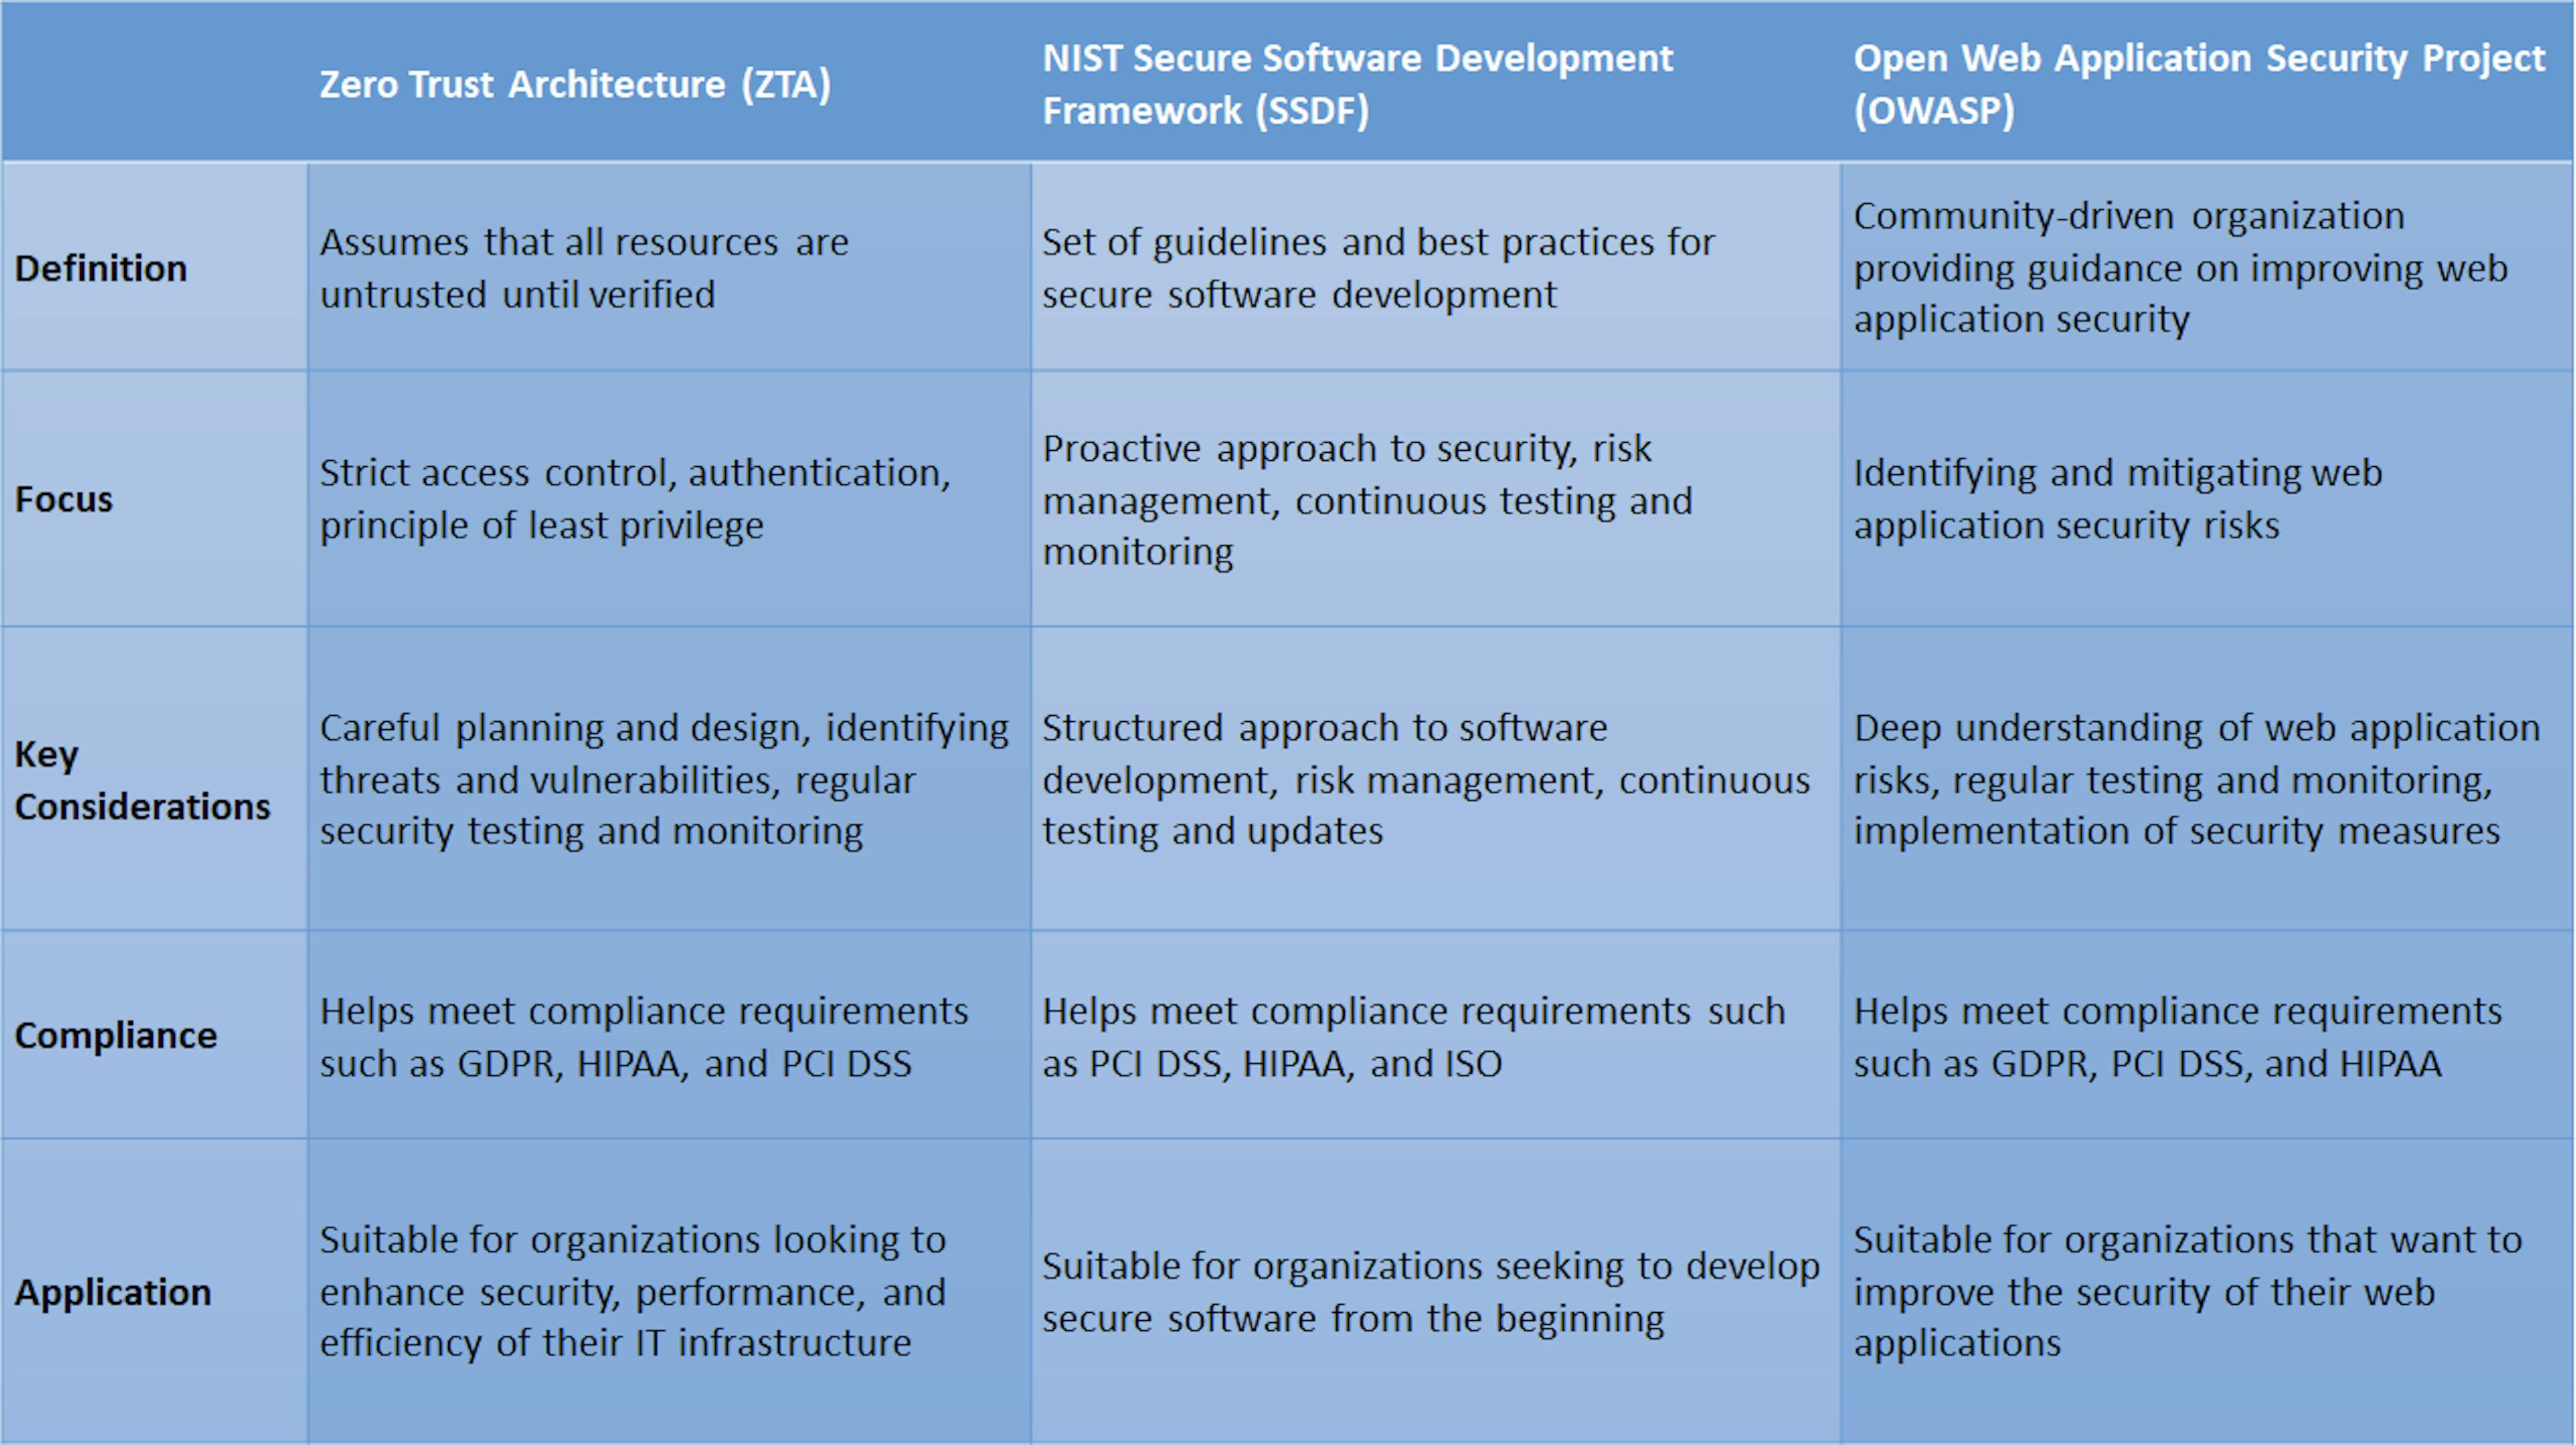 Table Comparison of all three frameworks